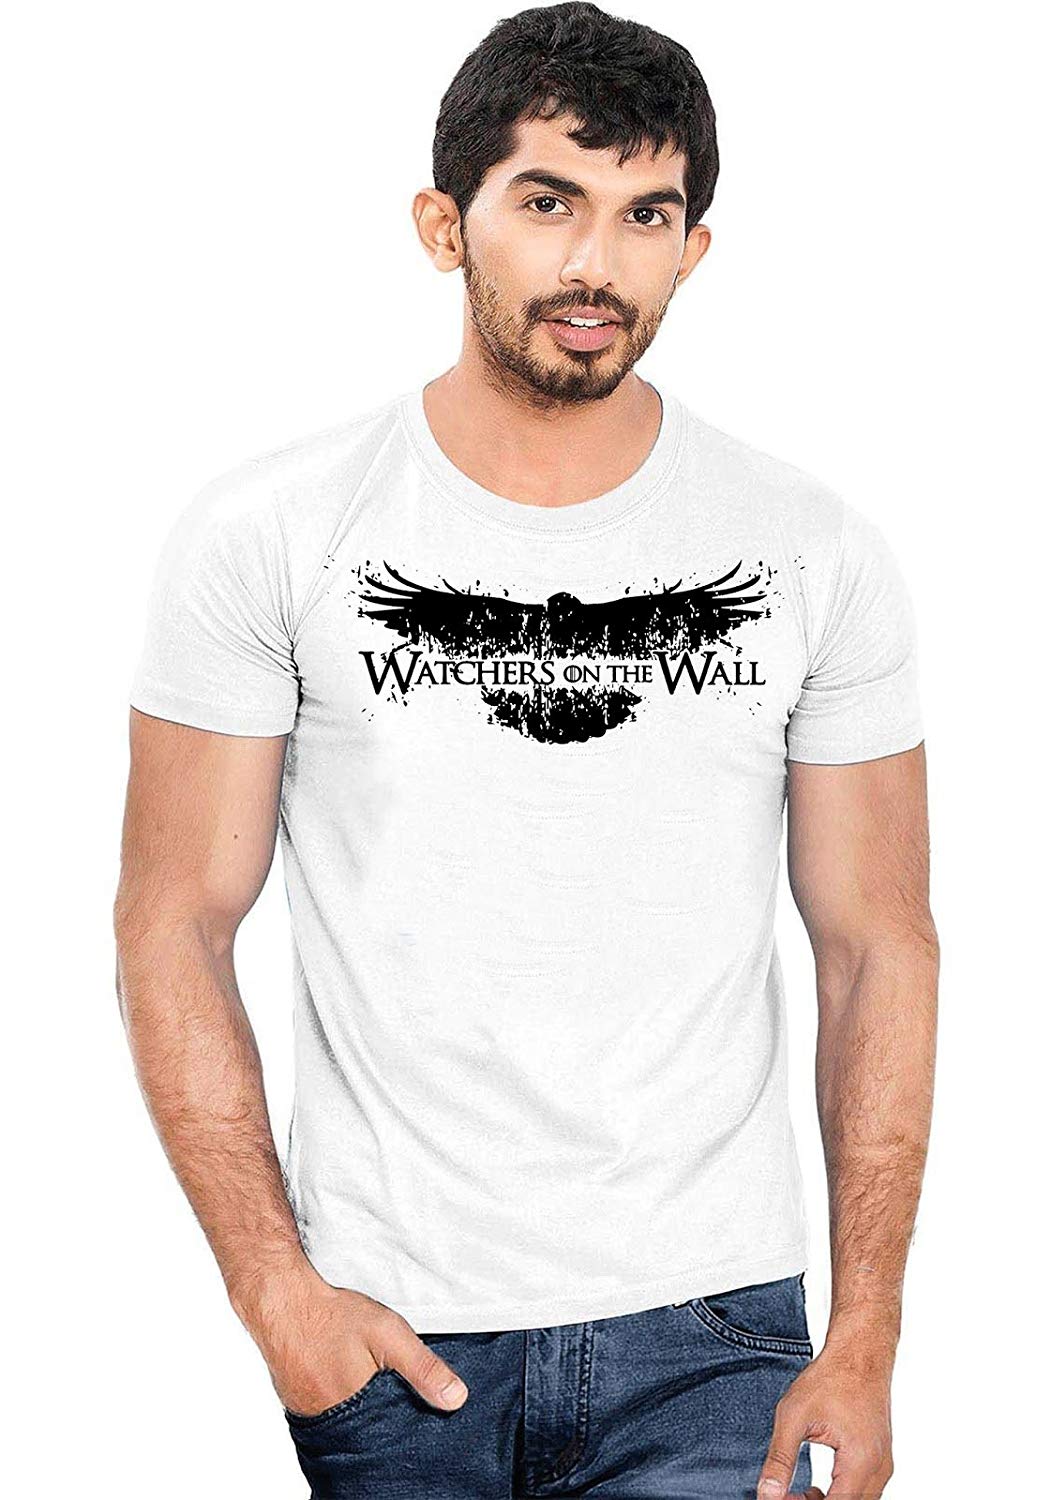 DOUBLE F ROUND NECK HALF SLEEVE WHITE COLOR WATCHERS ON THE WALL PRINTED T-SHIRT FOR MEN